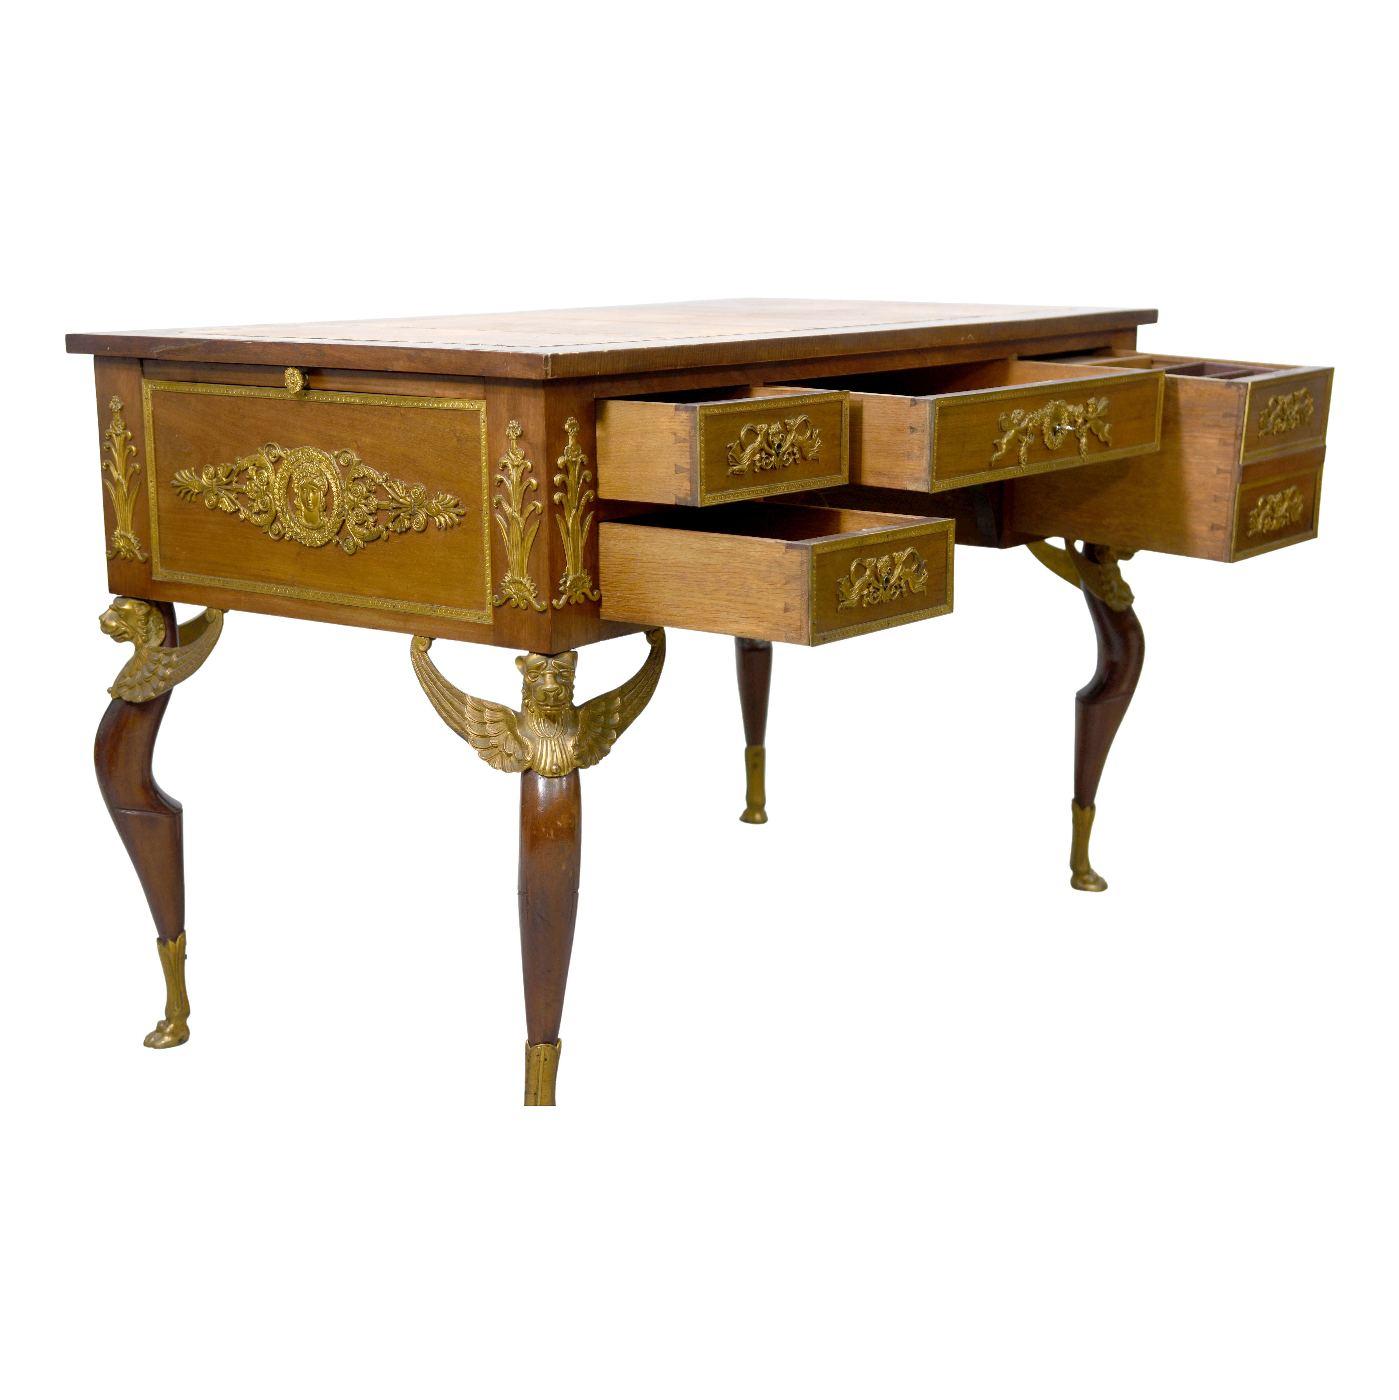 Lady's desk with Empire style mahogany, base decorated with griffins, very beautiful register of gilded bronzes oak drawer bottoms, top and zippers trimmed with brown and green Moroccan, the leather of the desk would eventually have to change.